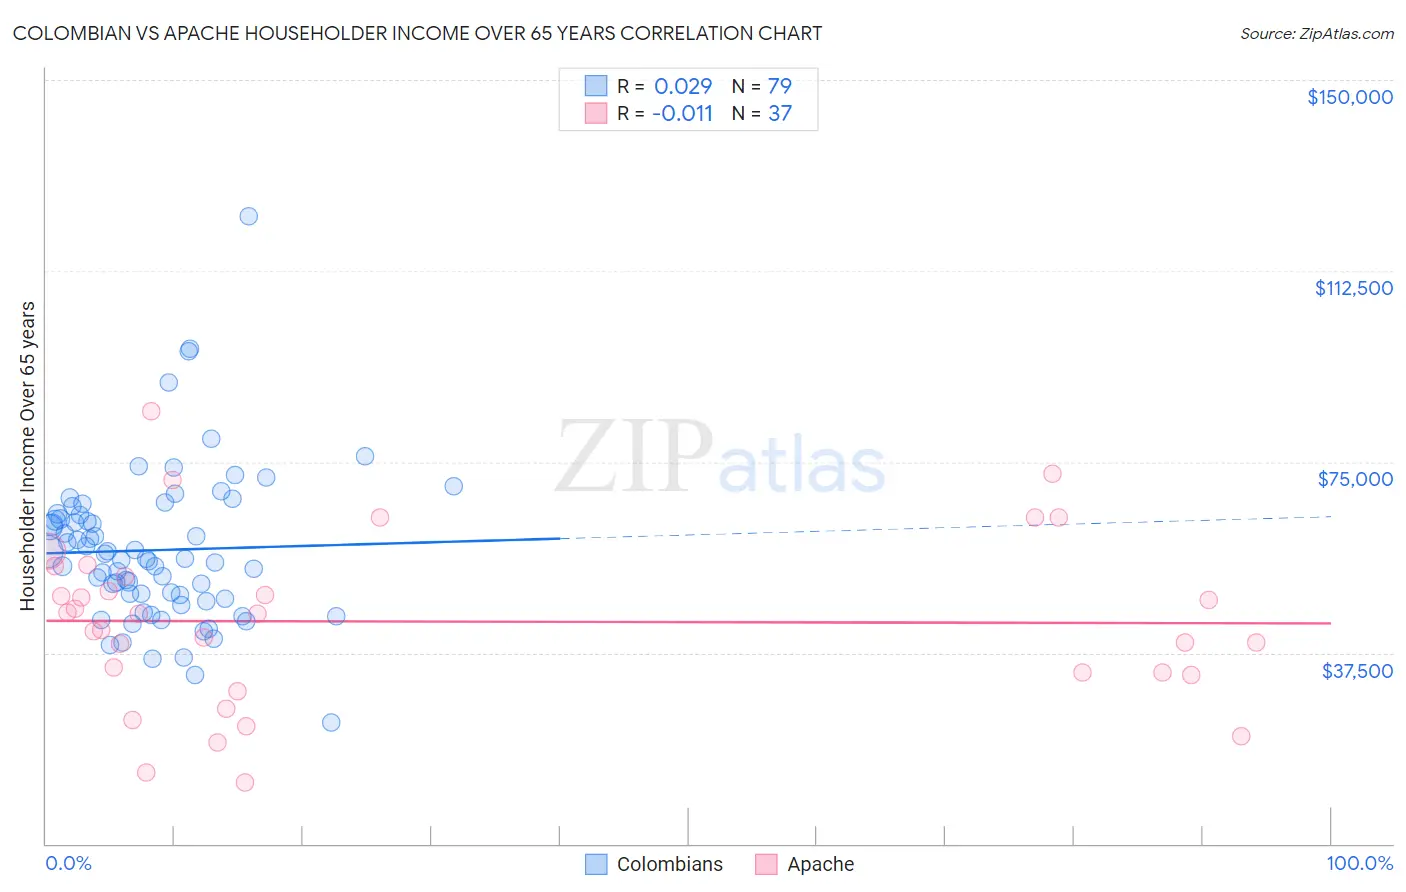 Colombian vs Apache Householder Income Over 65 years